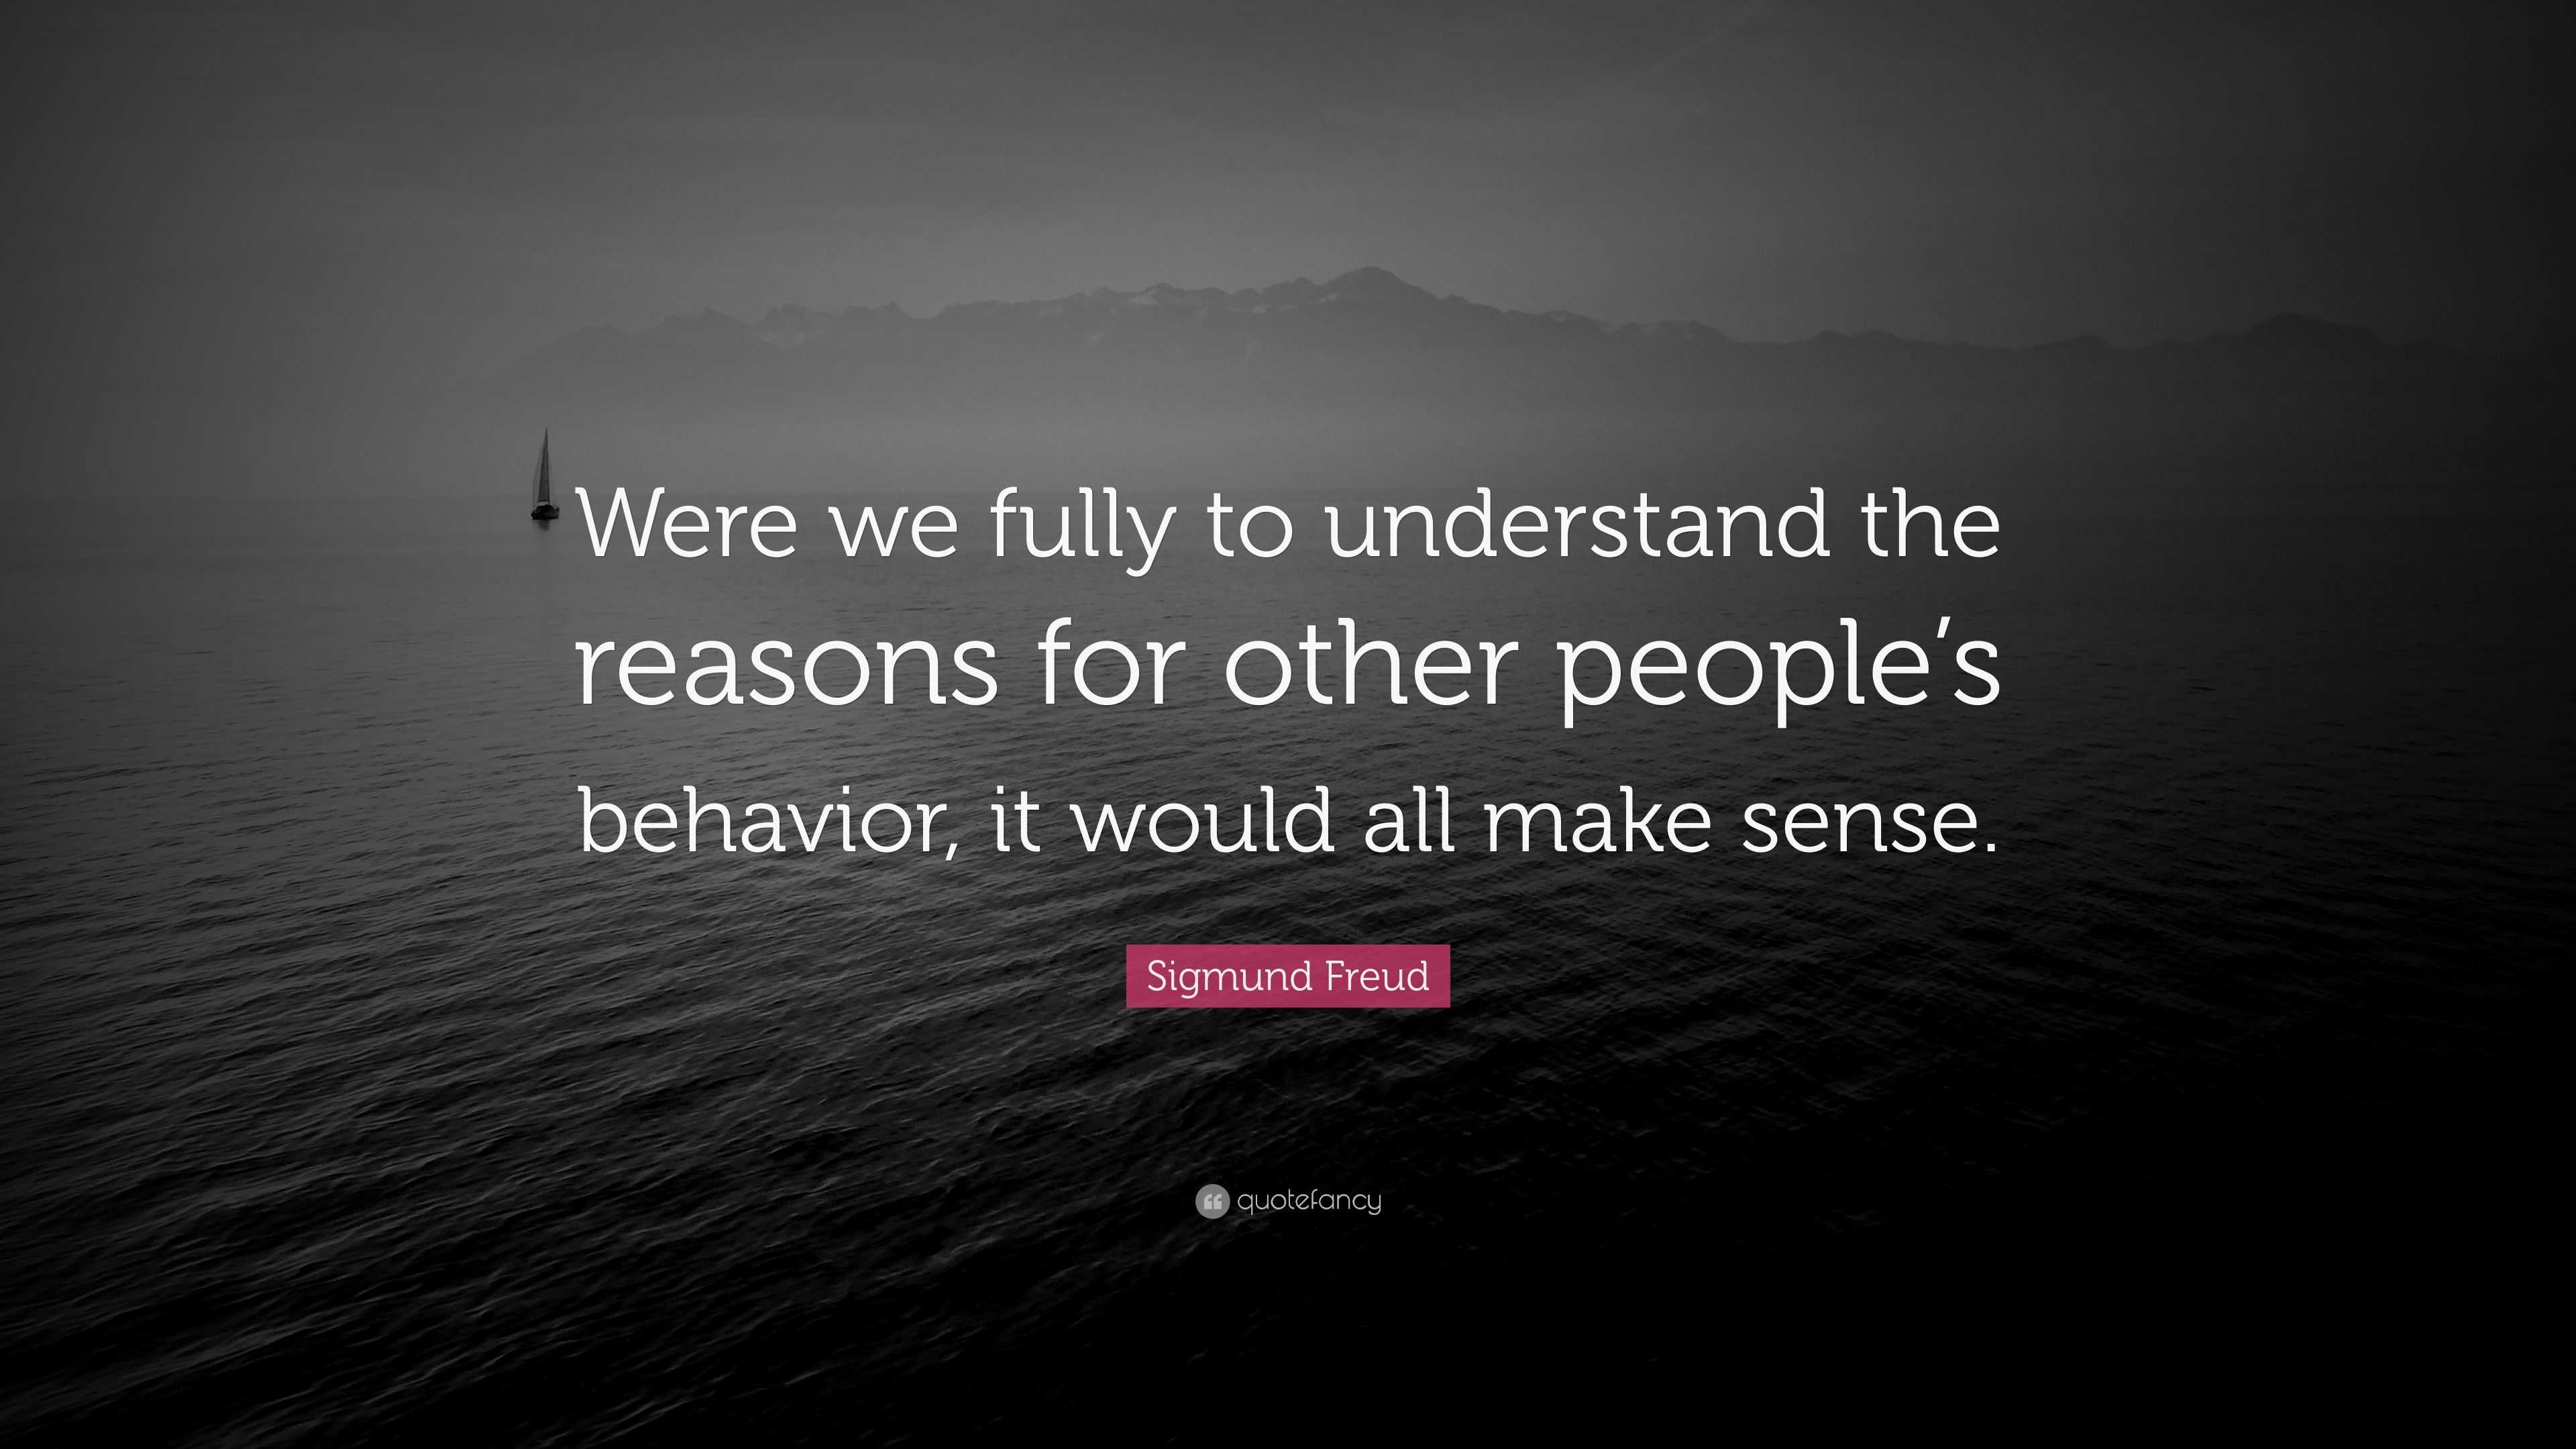 Sigmund Freud Quote: “Were we fully to understand the reasons for other ...